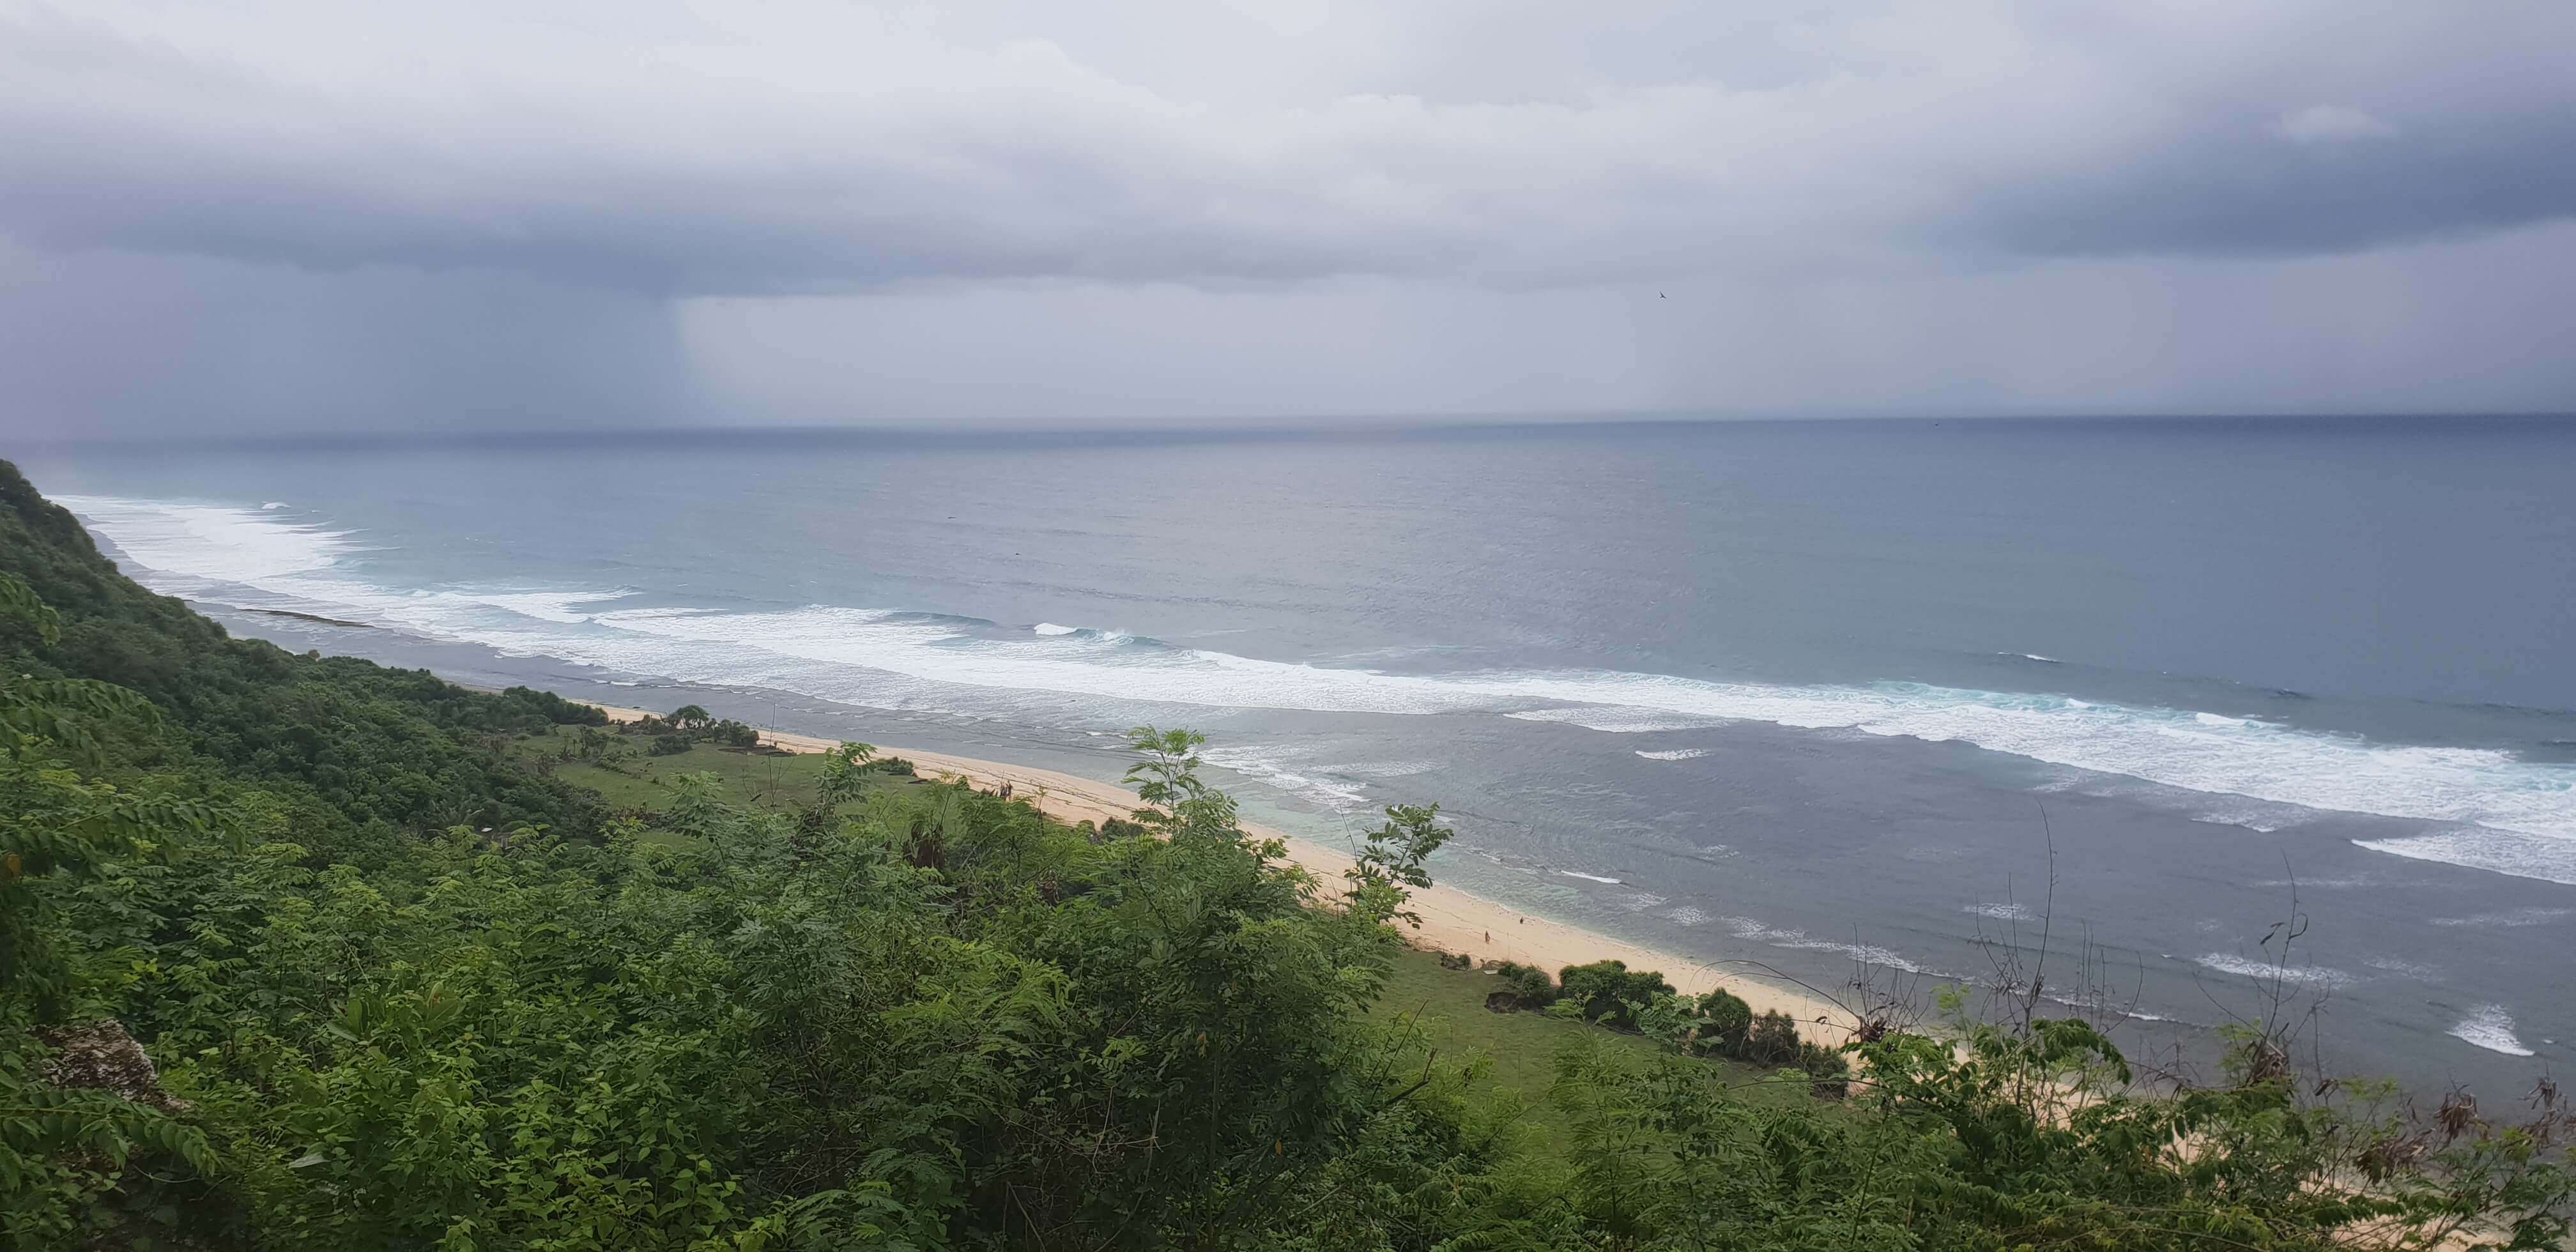 Nyang Nyang beach is one of the most stunning beaches to visit in Uluwatu